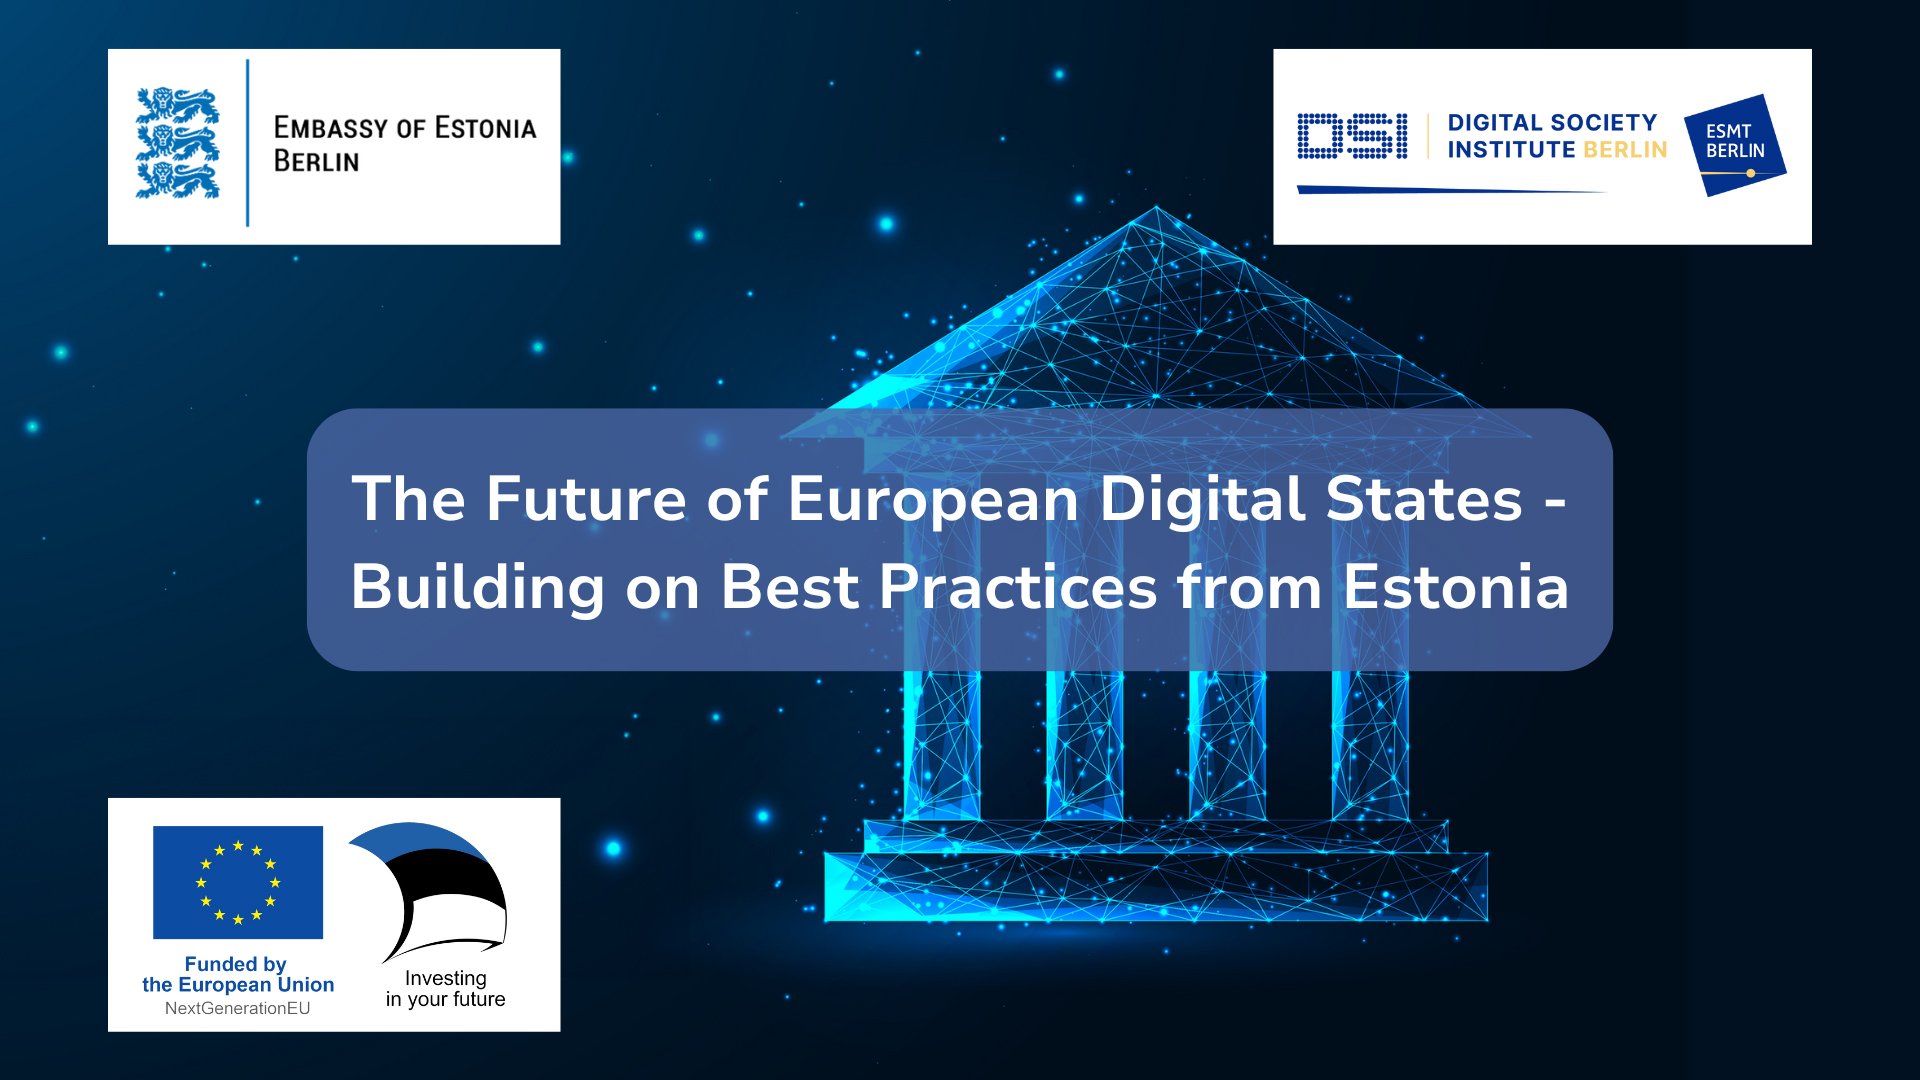 The Future of European Digital States - Building on Best Practices from Estonia